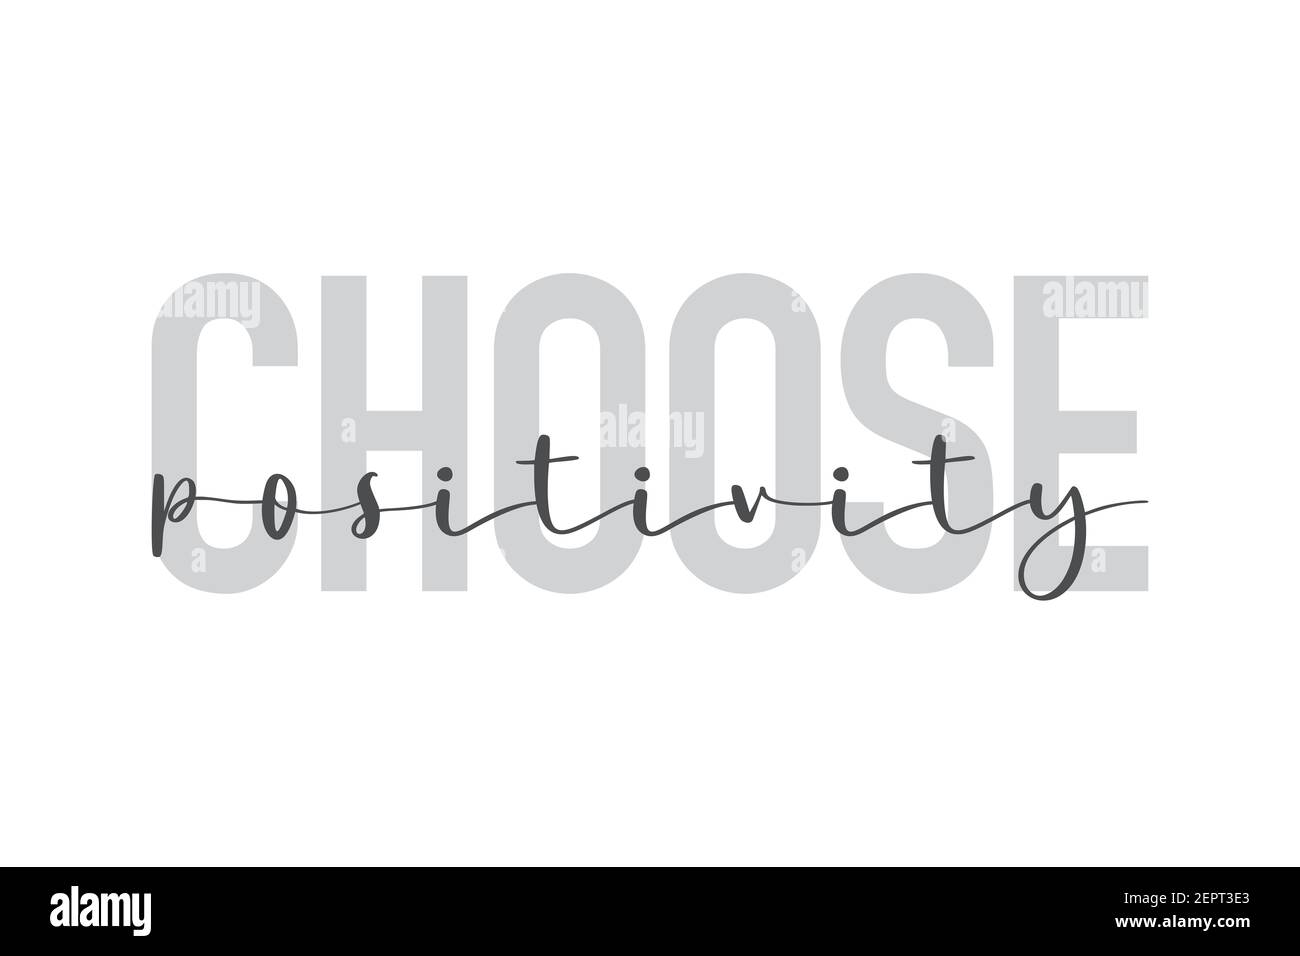 Modern, urban, simple graphic design of a saying 'Choose Positivity' in grey colors. Trendy, cool, handwritten typography Stock Photo